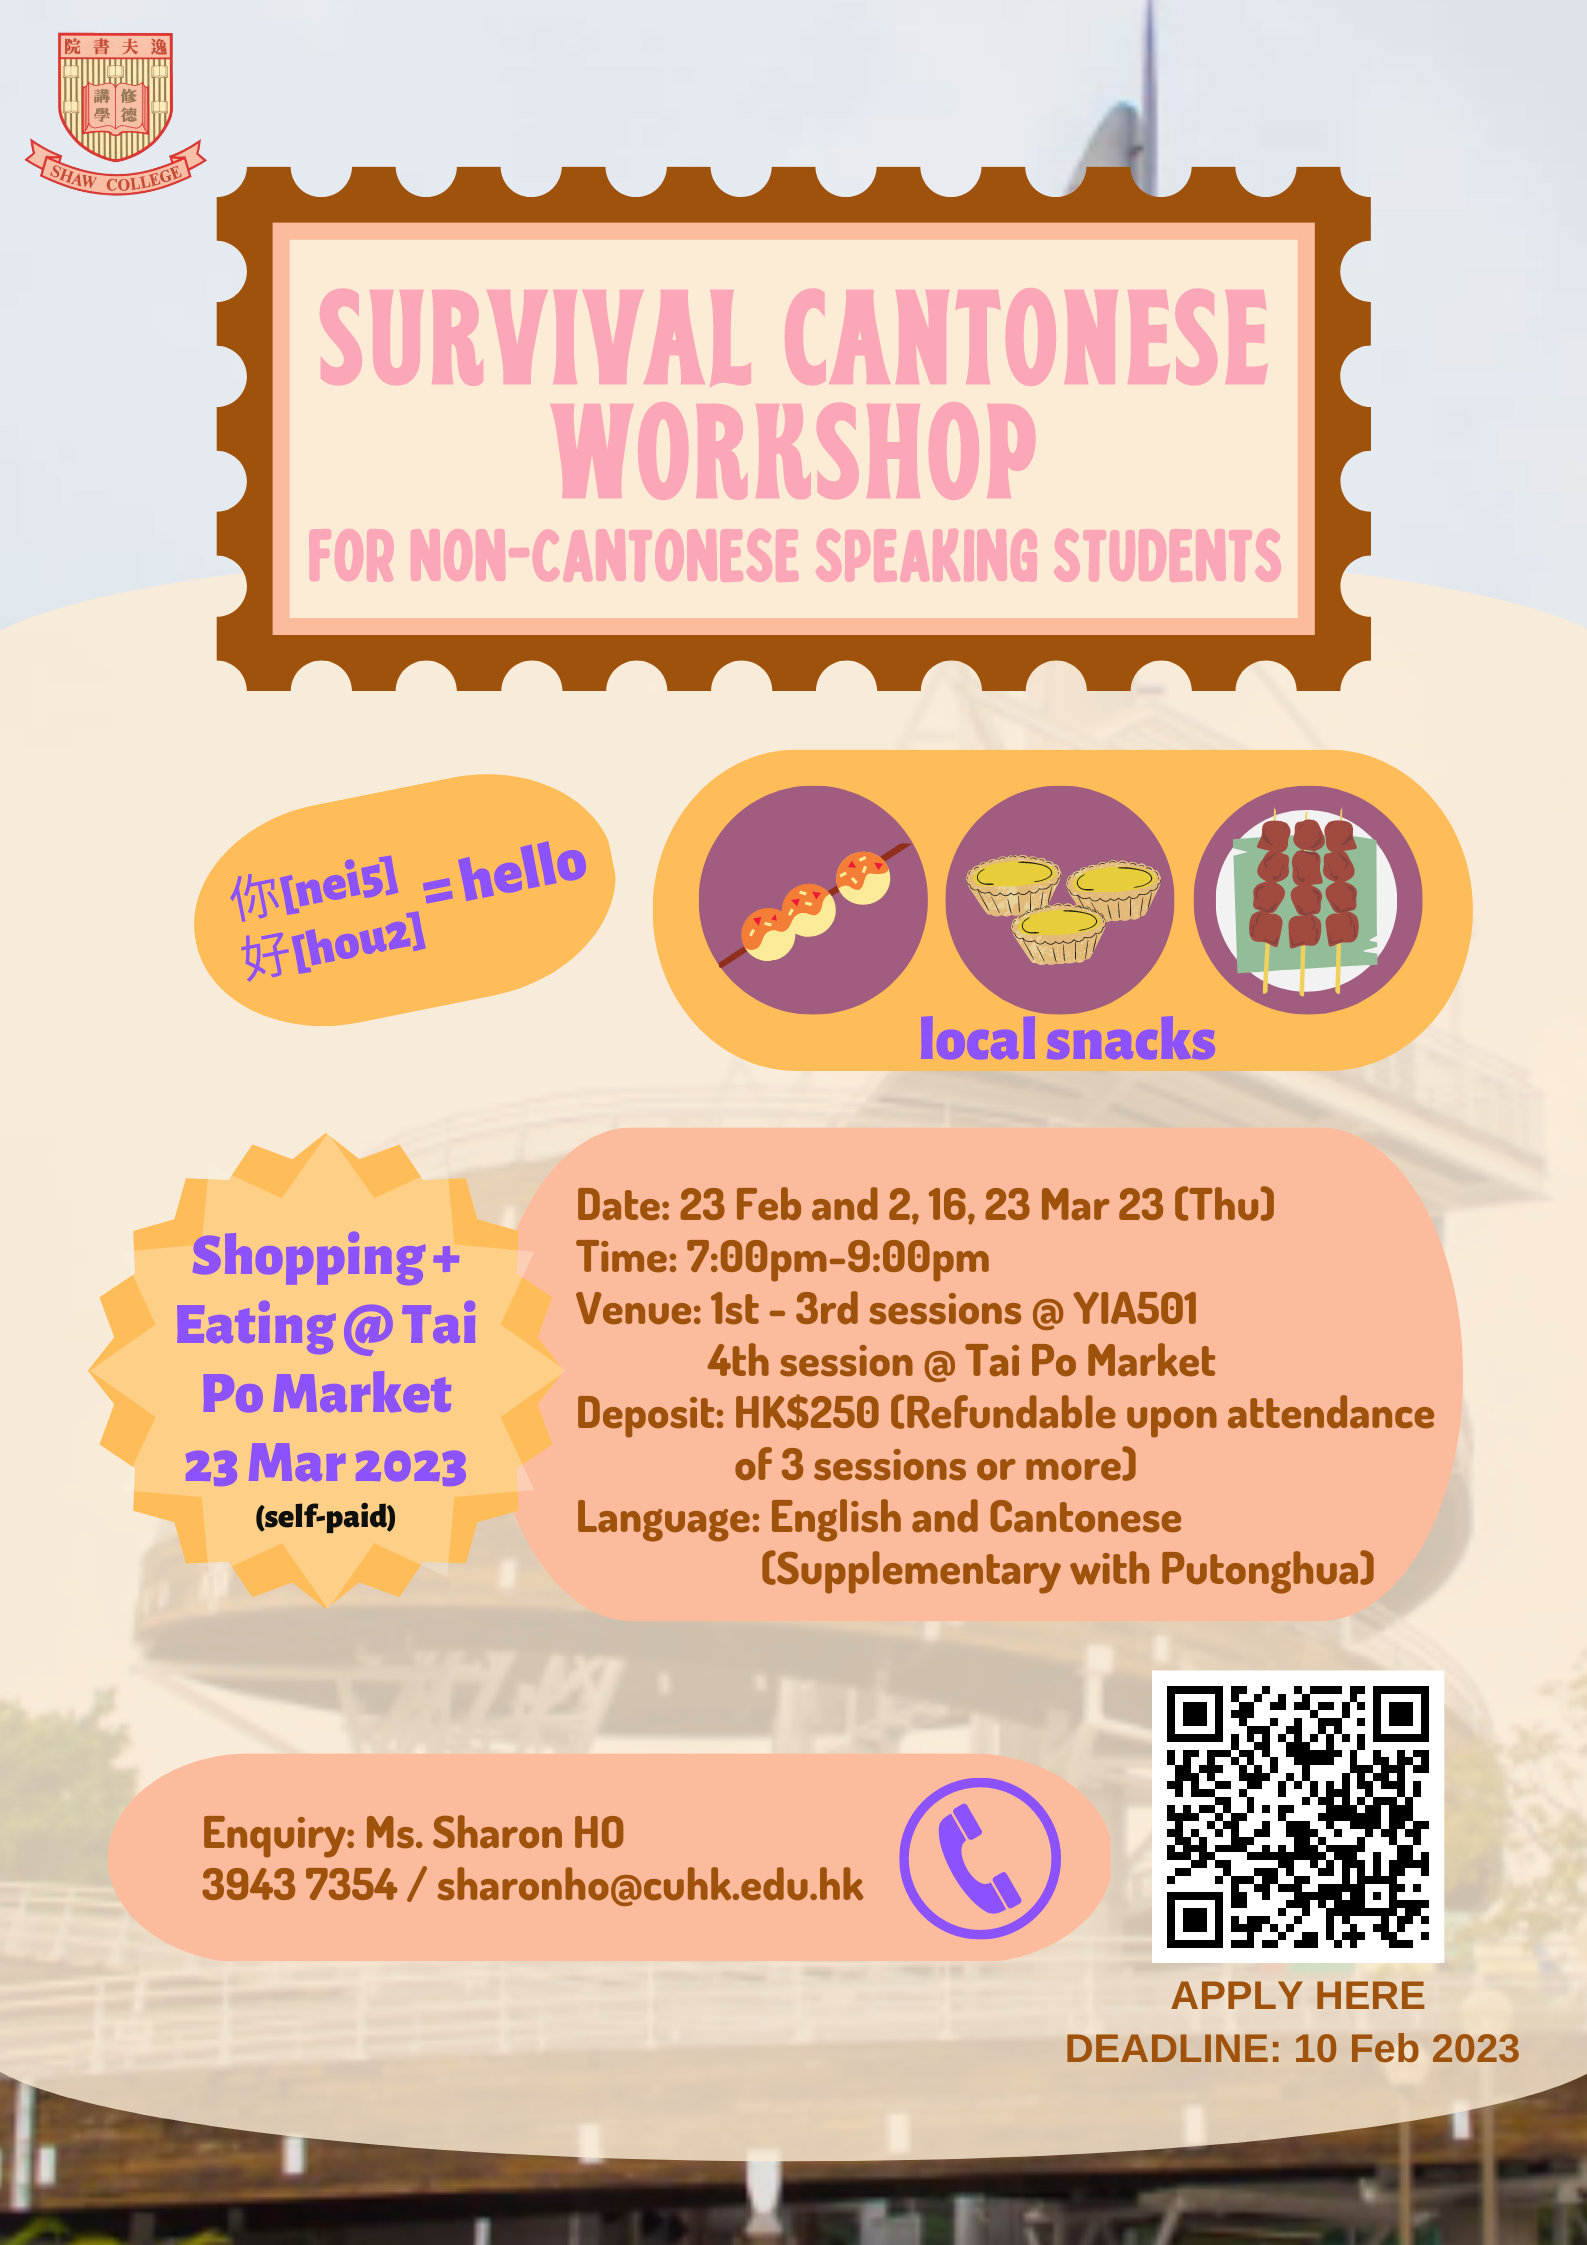 Survival Cantonese Workshop for Non-Cantonese Speaking Students 